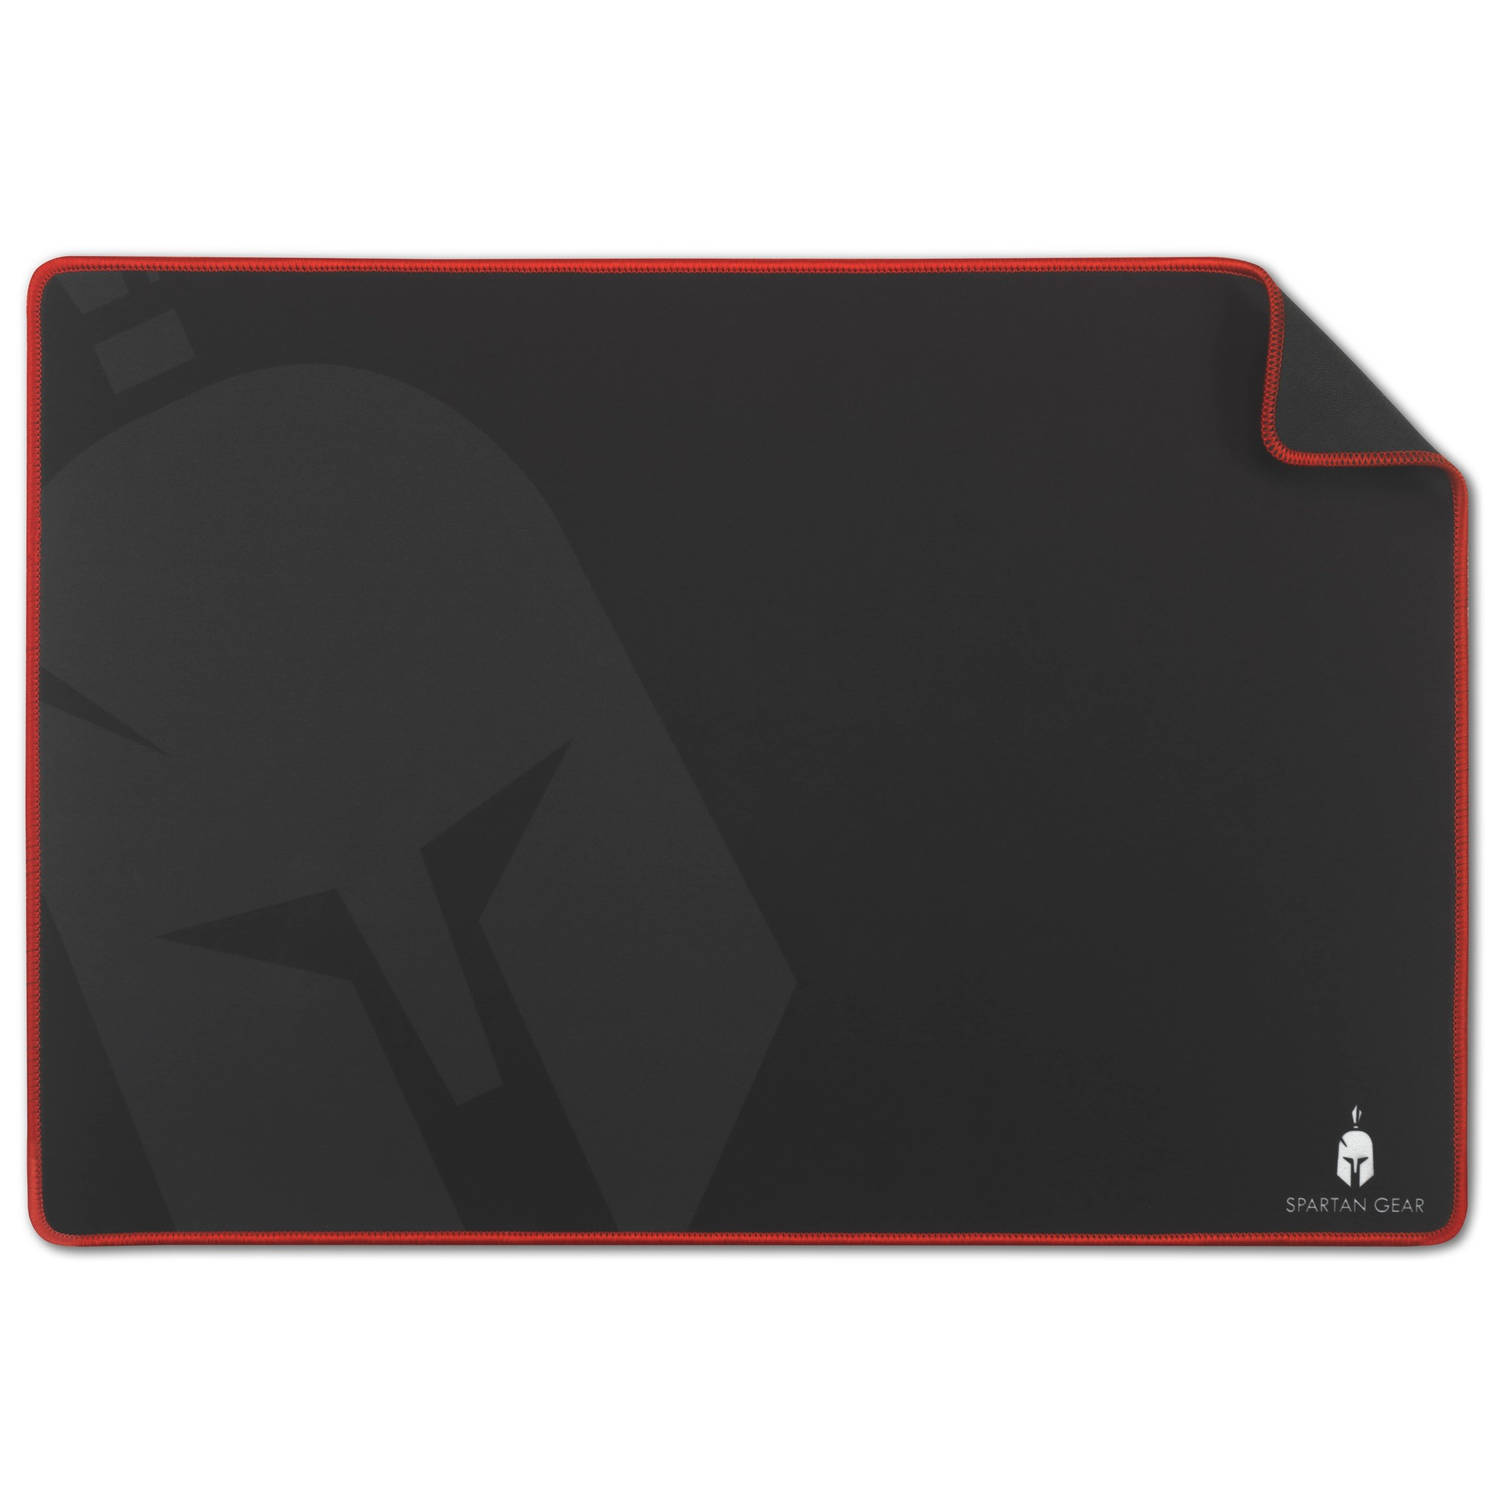 Ares 2 Gaming Mousemat XL (520mm x 350mm)